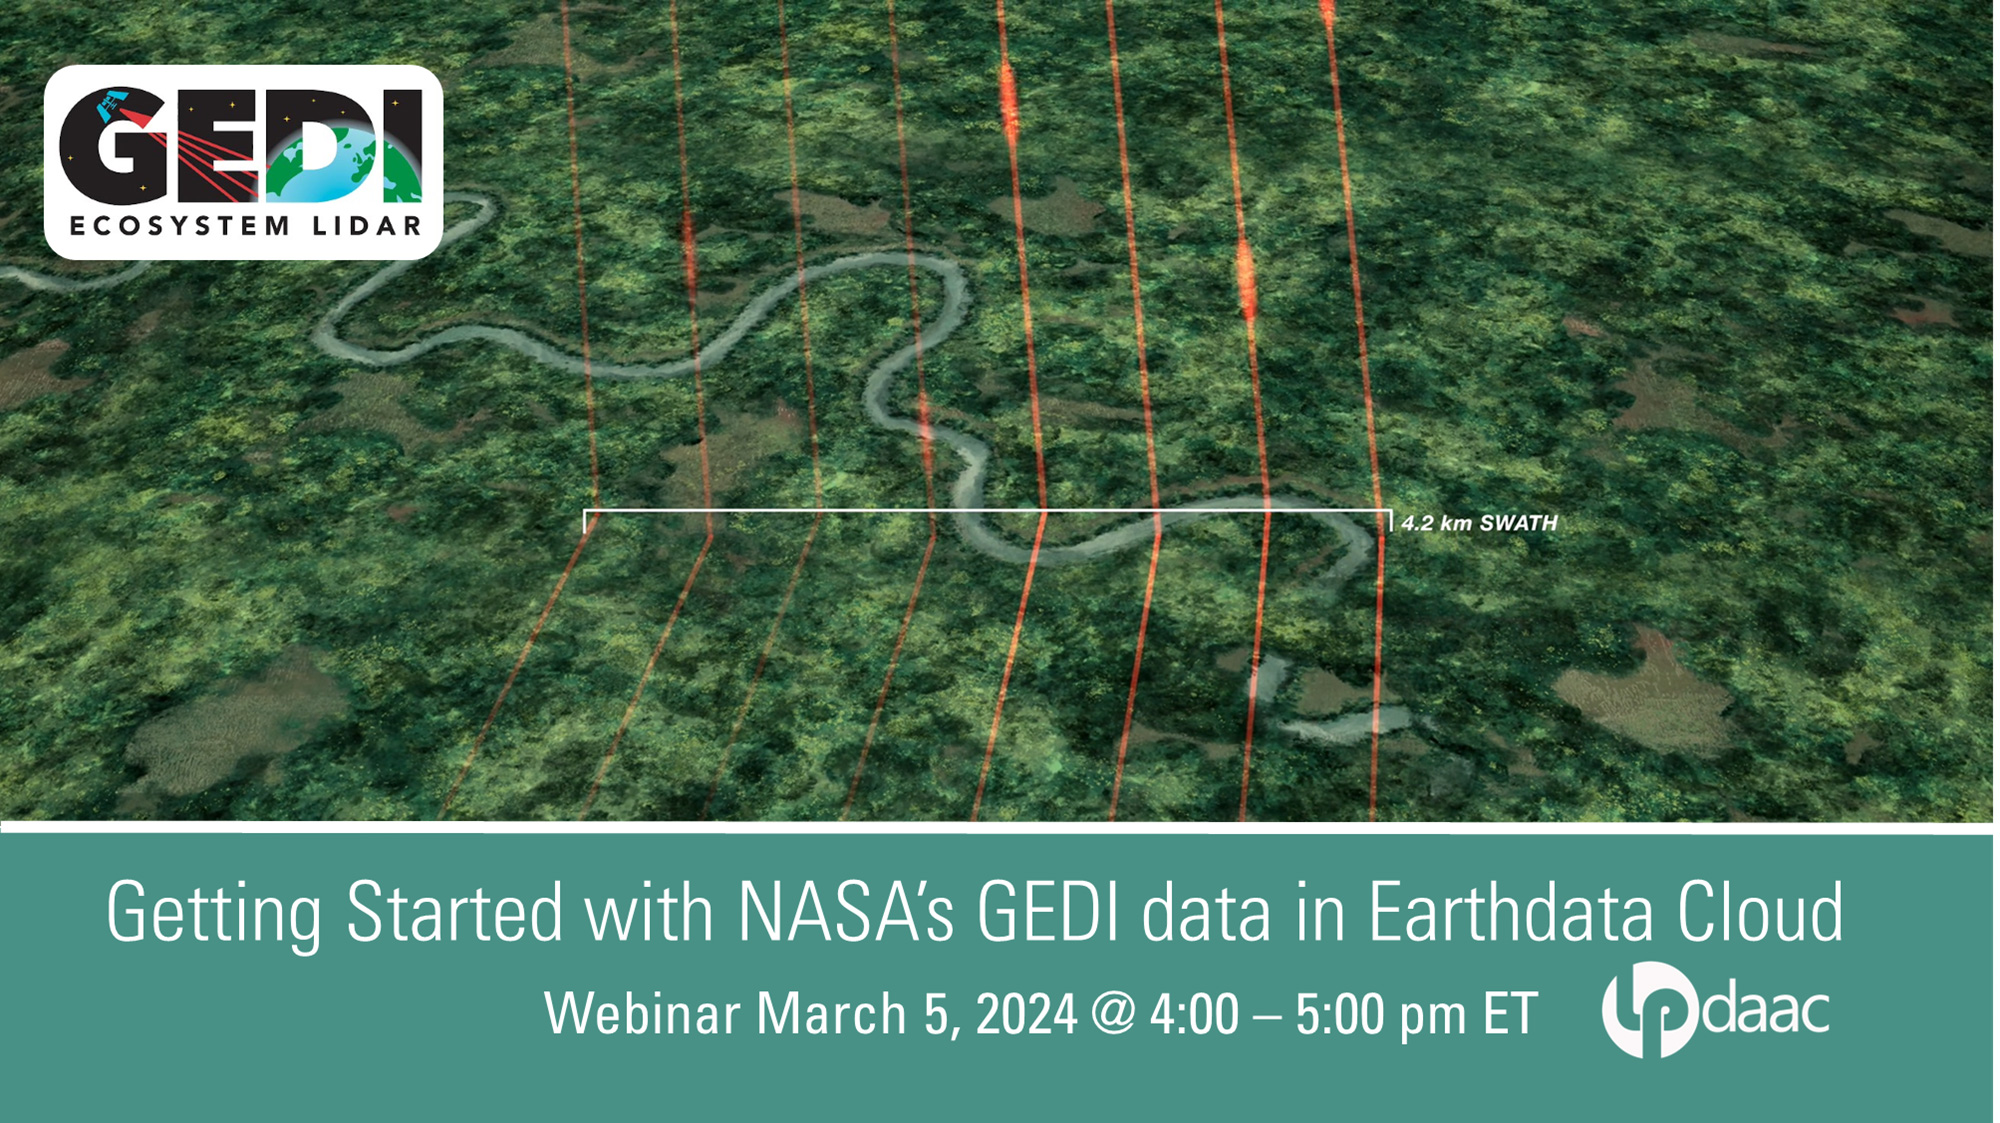 AEIOP and LP DAAC webinar banner image for the upcoming working with NASA GEDI data in the Earthdata Cloud webinar to be held 3/5/24.